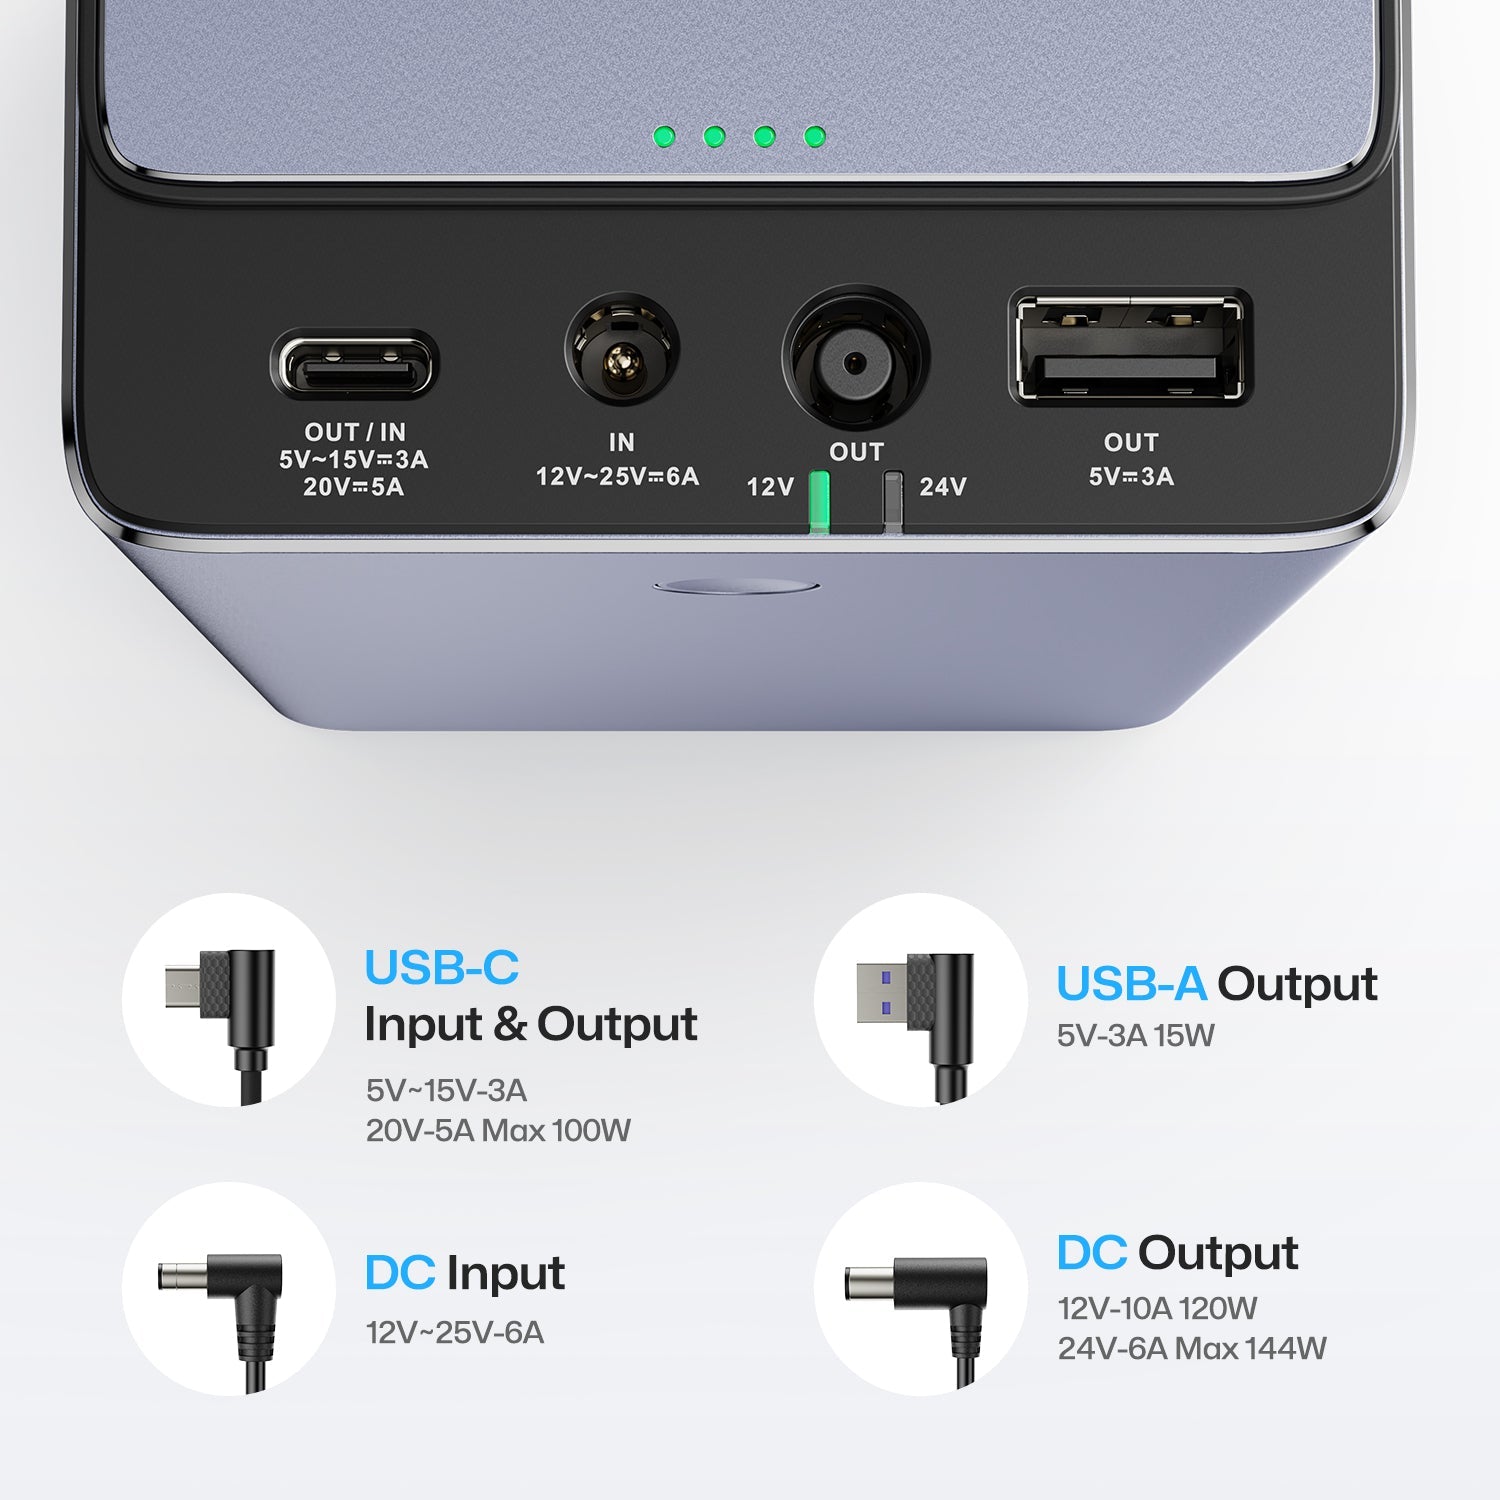 Port types explanation: USB-C input and output, USB-A output, DC input and DC output